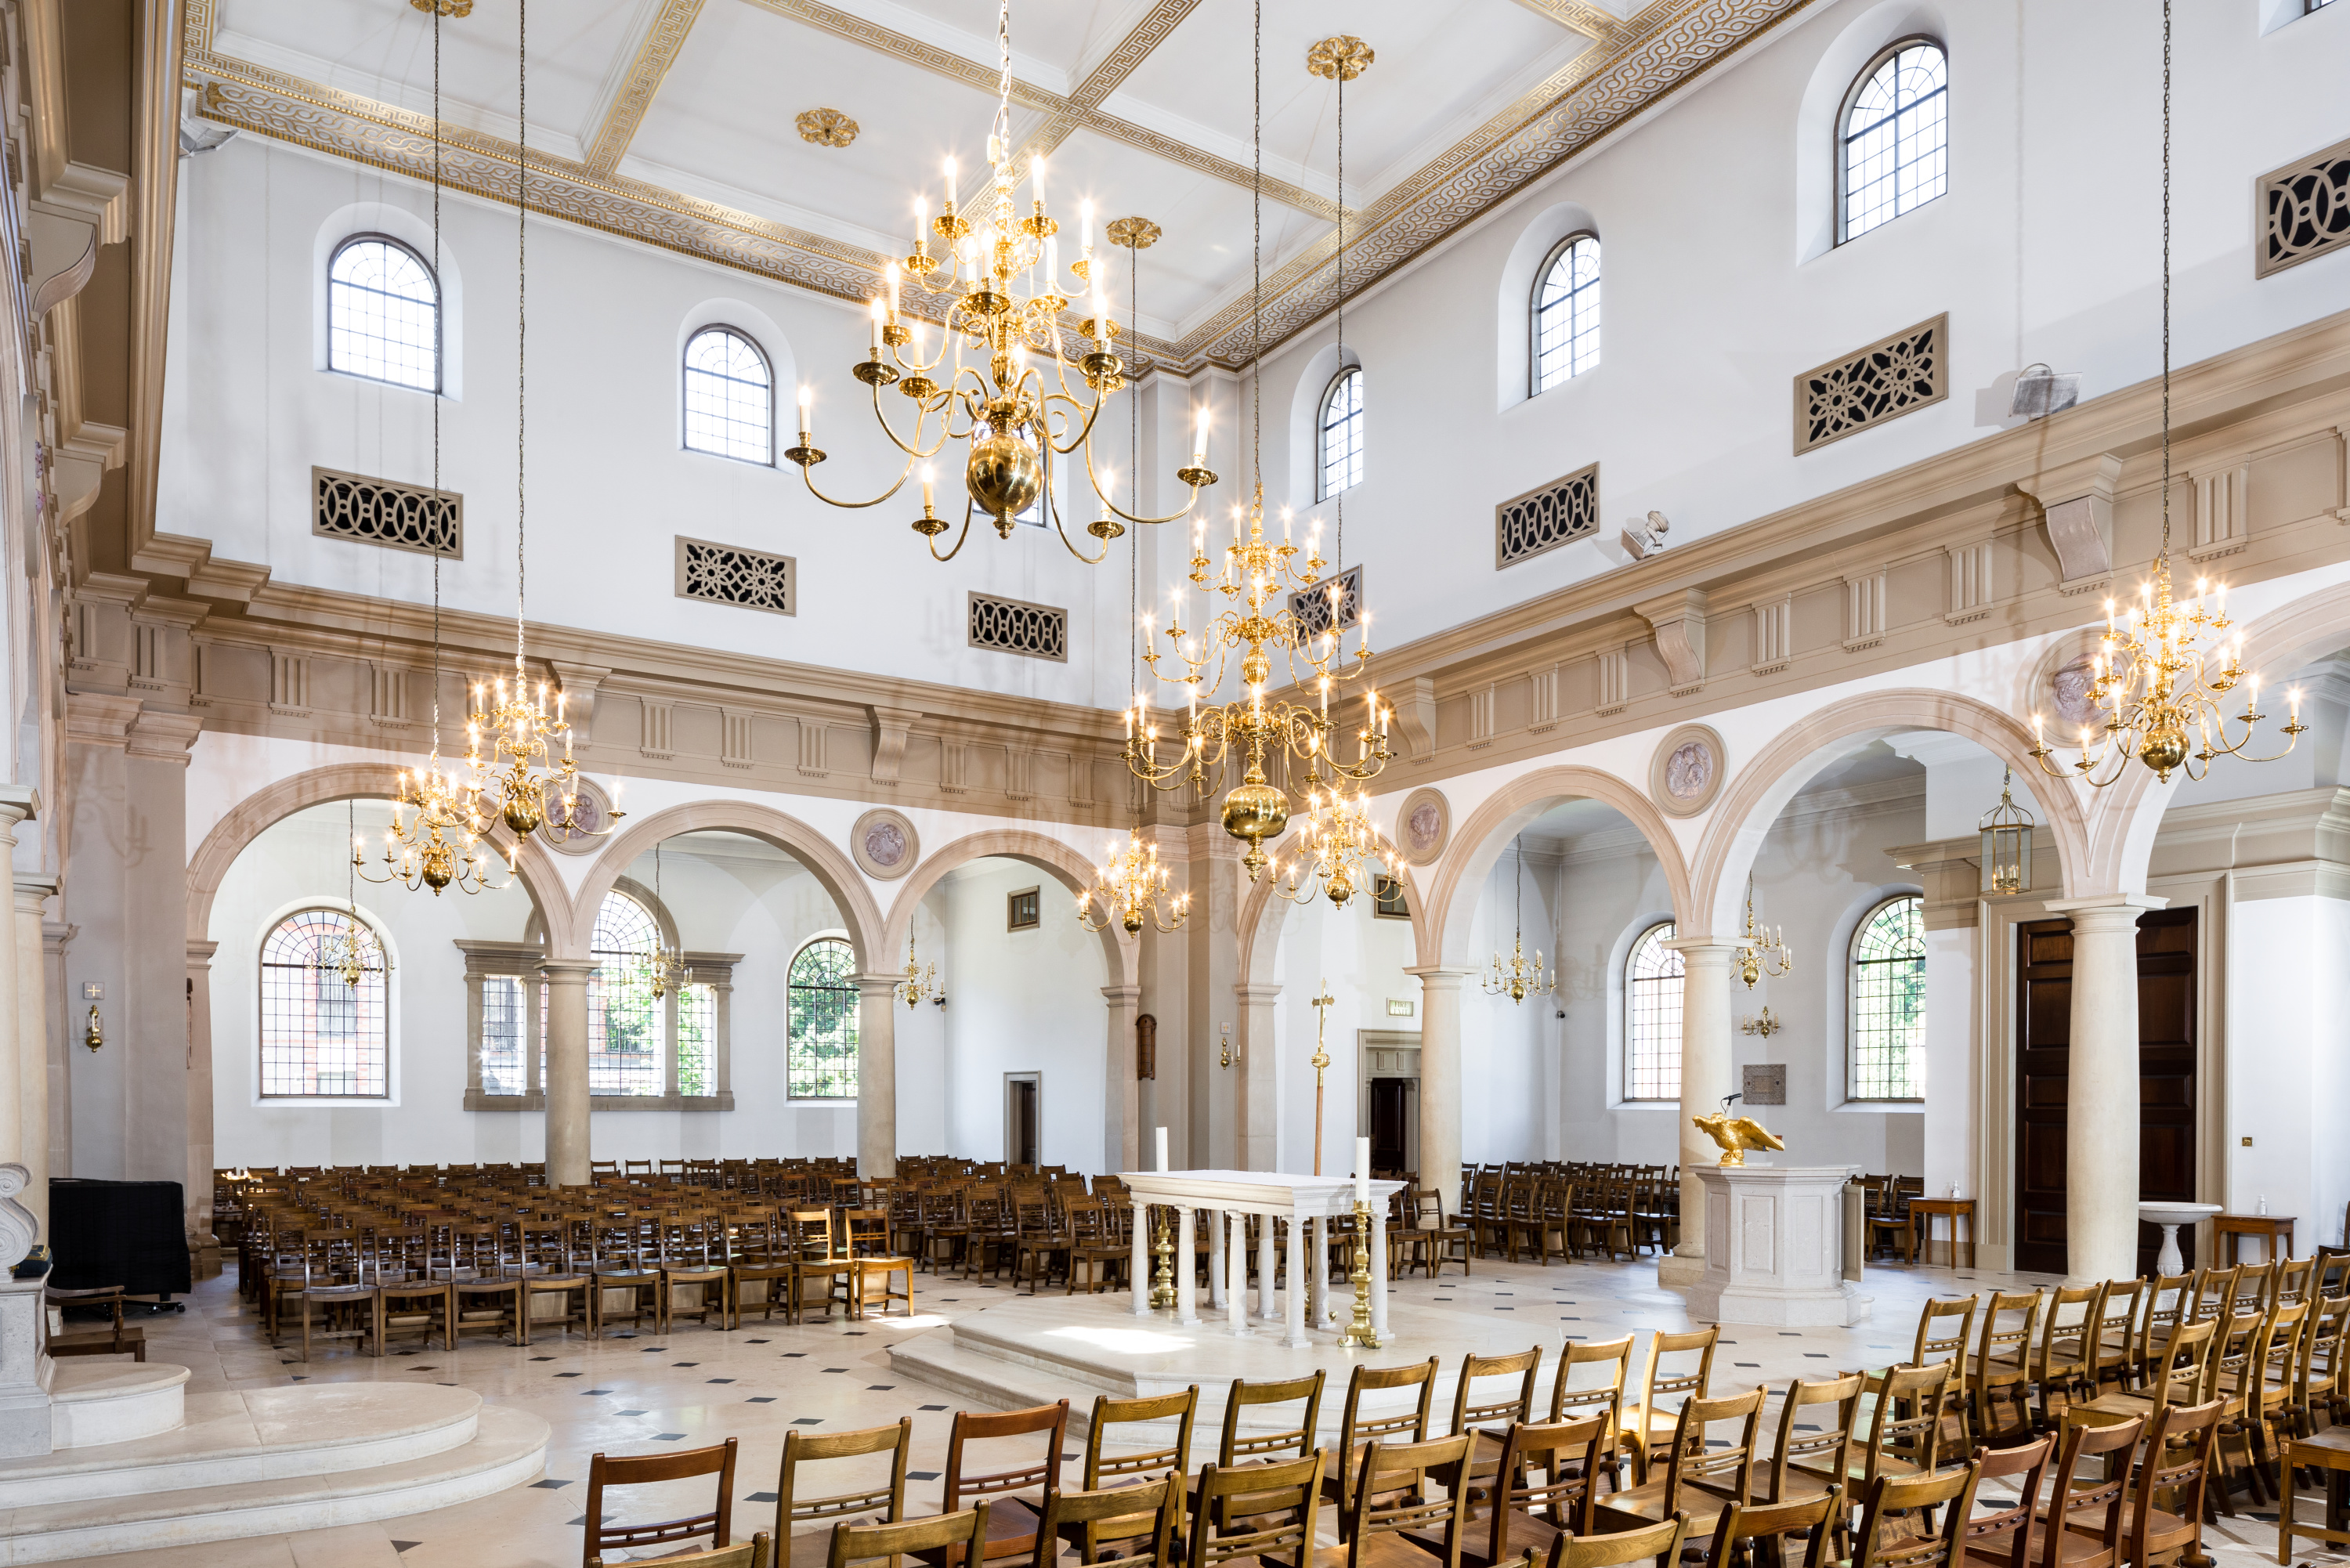 Brentwood Cathedral was opened in 1991. (Historic England Archive/ PA)